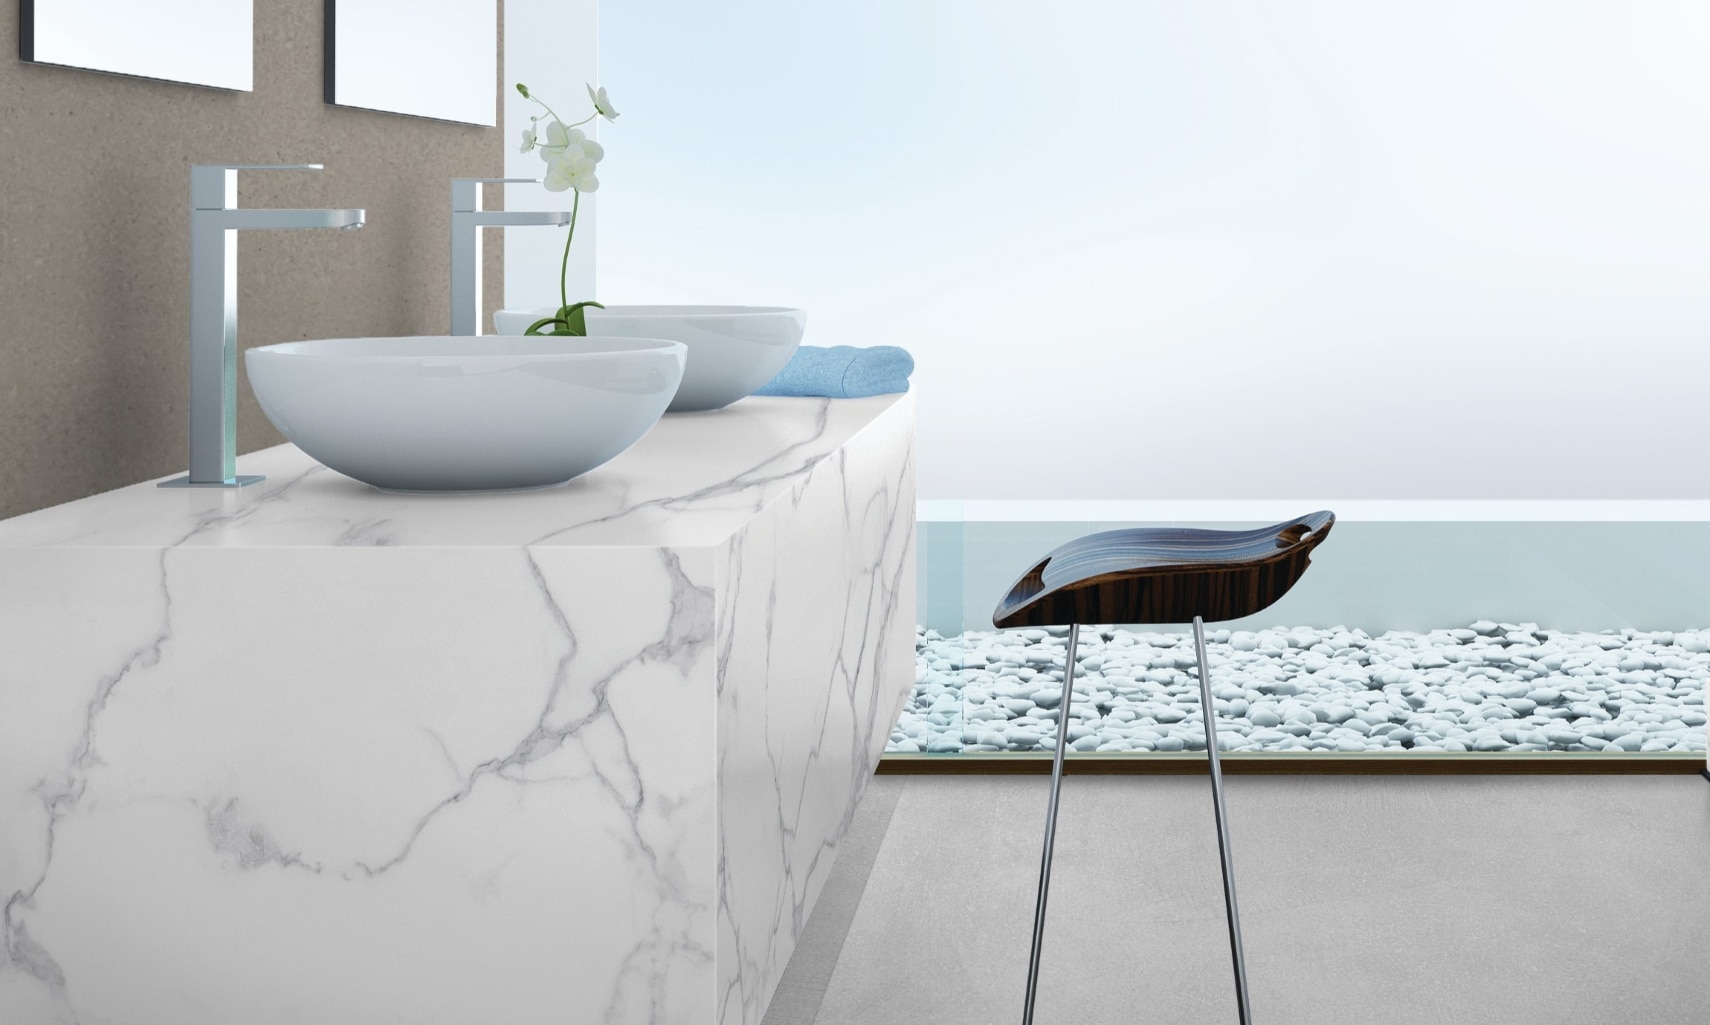 Bathroom with floating vanity made of white & gray marble look porcelain slab, dual white vessel sinks, small black vanity chair, and gray fabric look flooring.